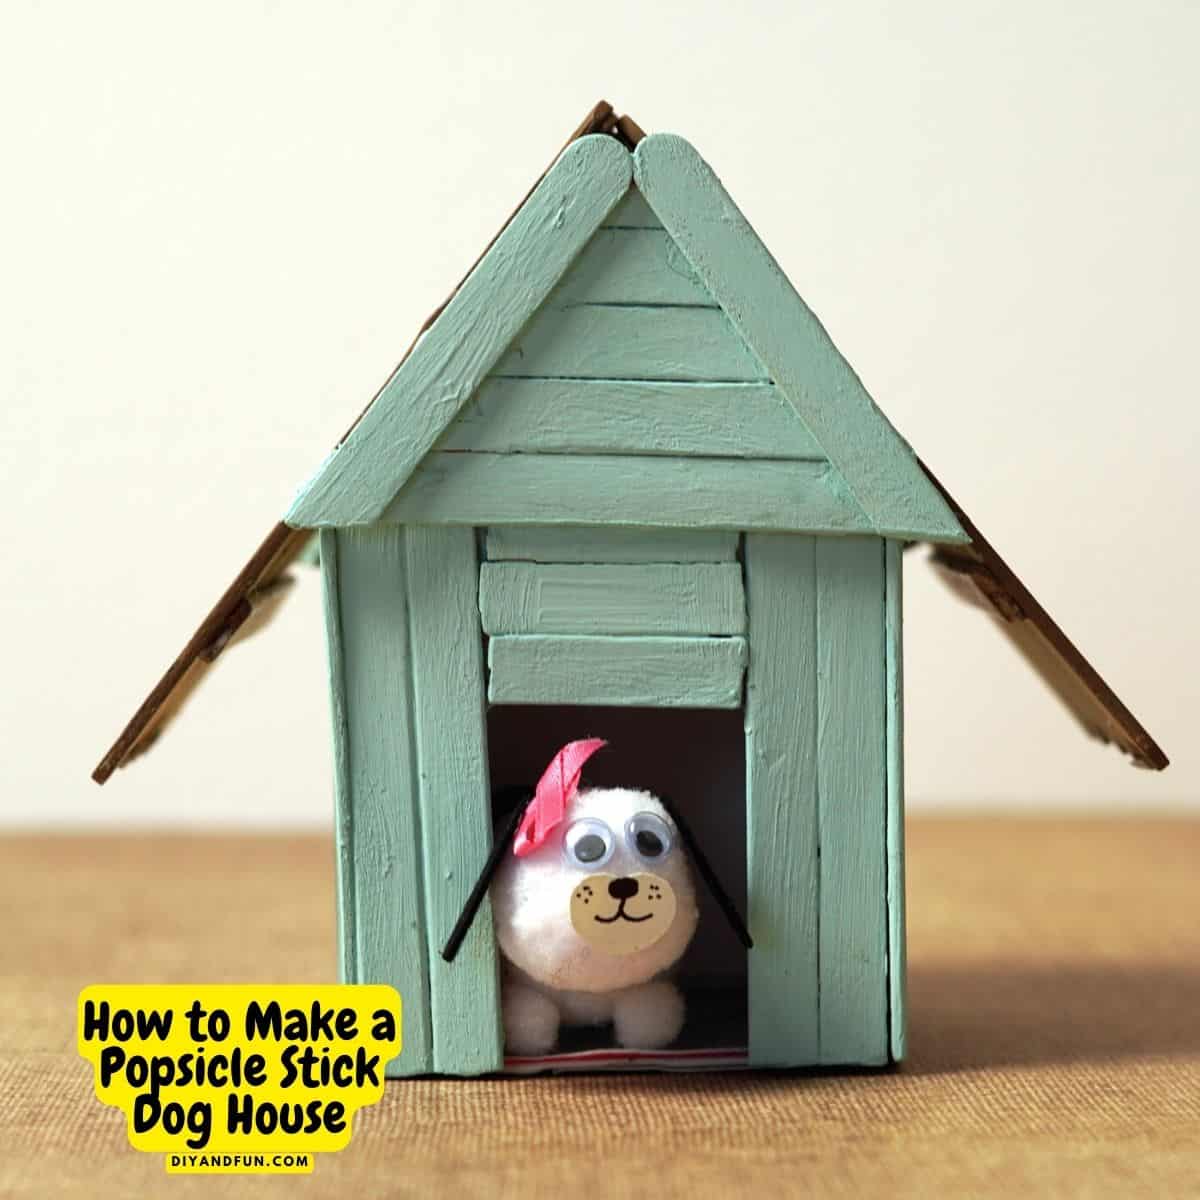 How to Make a Popsicle Stick Dog House, a simple DIY craft project made from an upcycled carton and craft (popsicle) sticks. Includes Video.